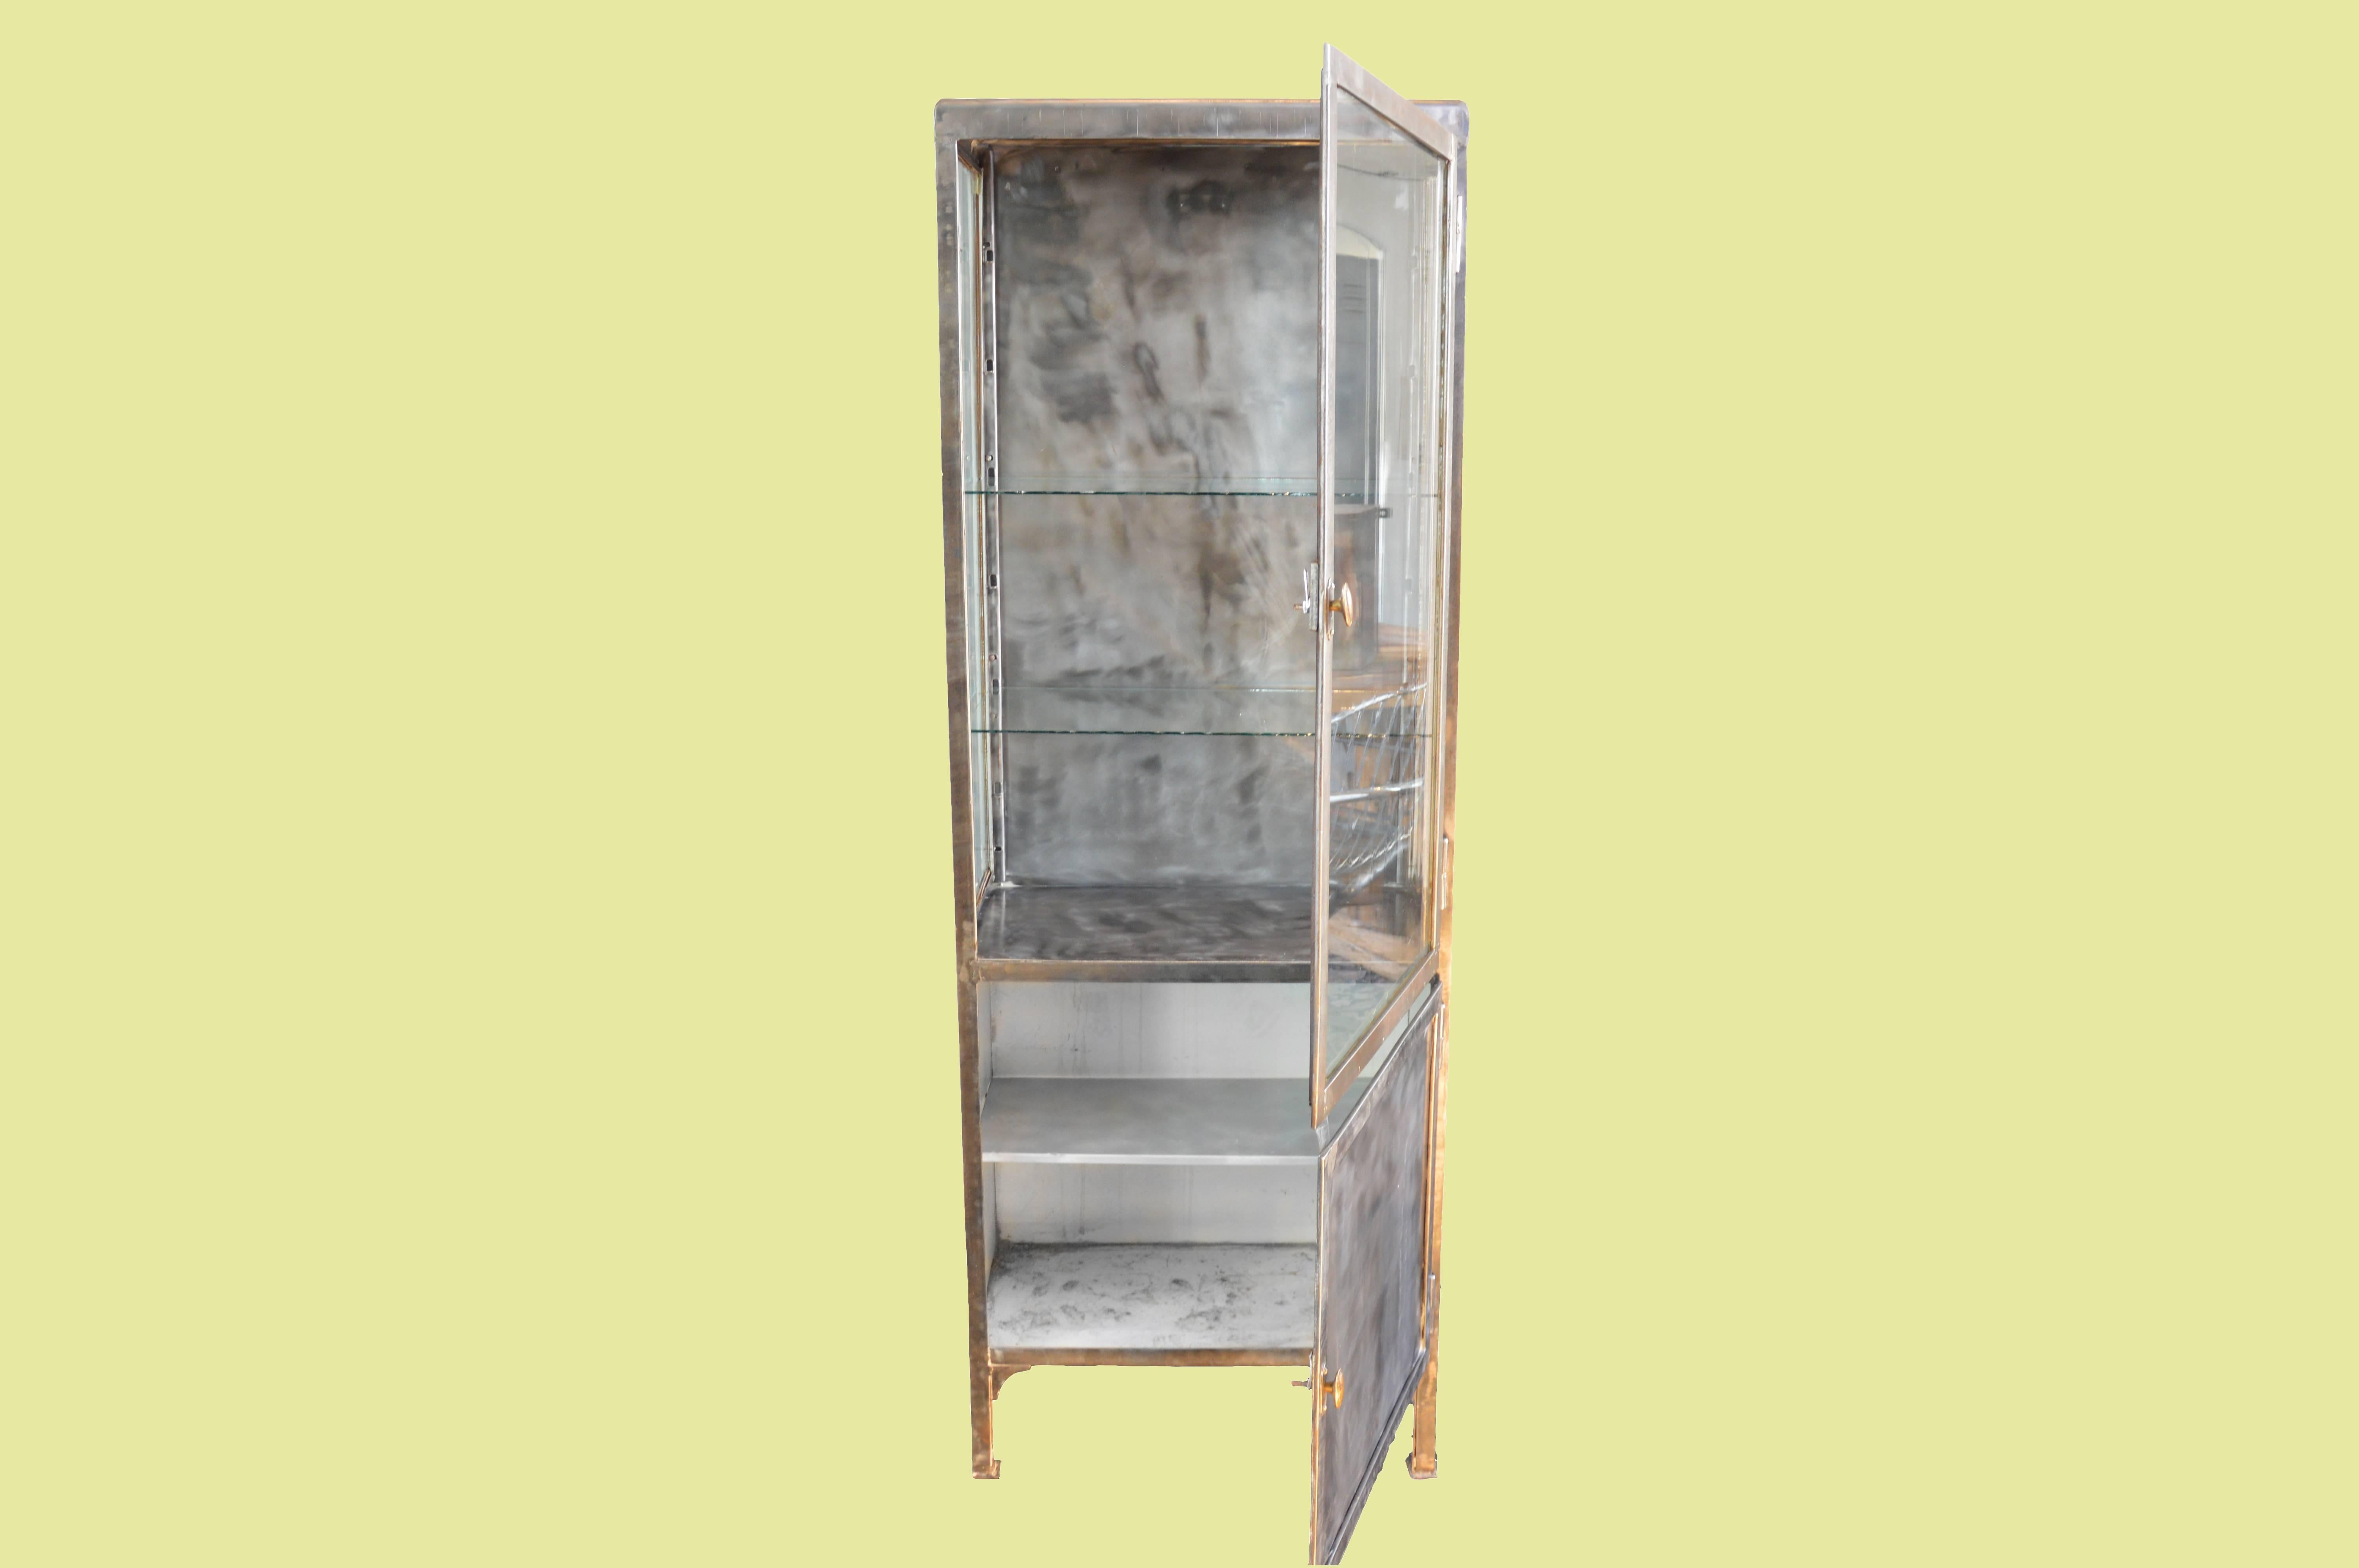 This vintage 1950s Industrial pharmacy cabinet origins from Eastern Europe and was used in hospitals and pharmacies. 

The cabinets were originally painted white, but we used special techniques, burned the paint of, polished the steel and made